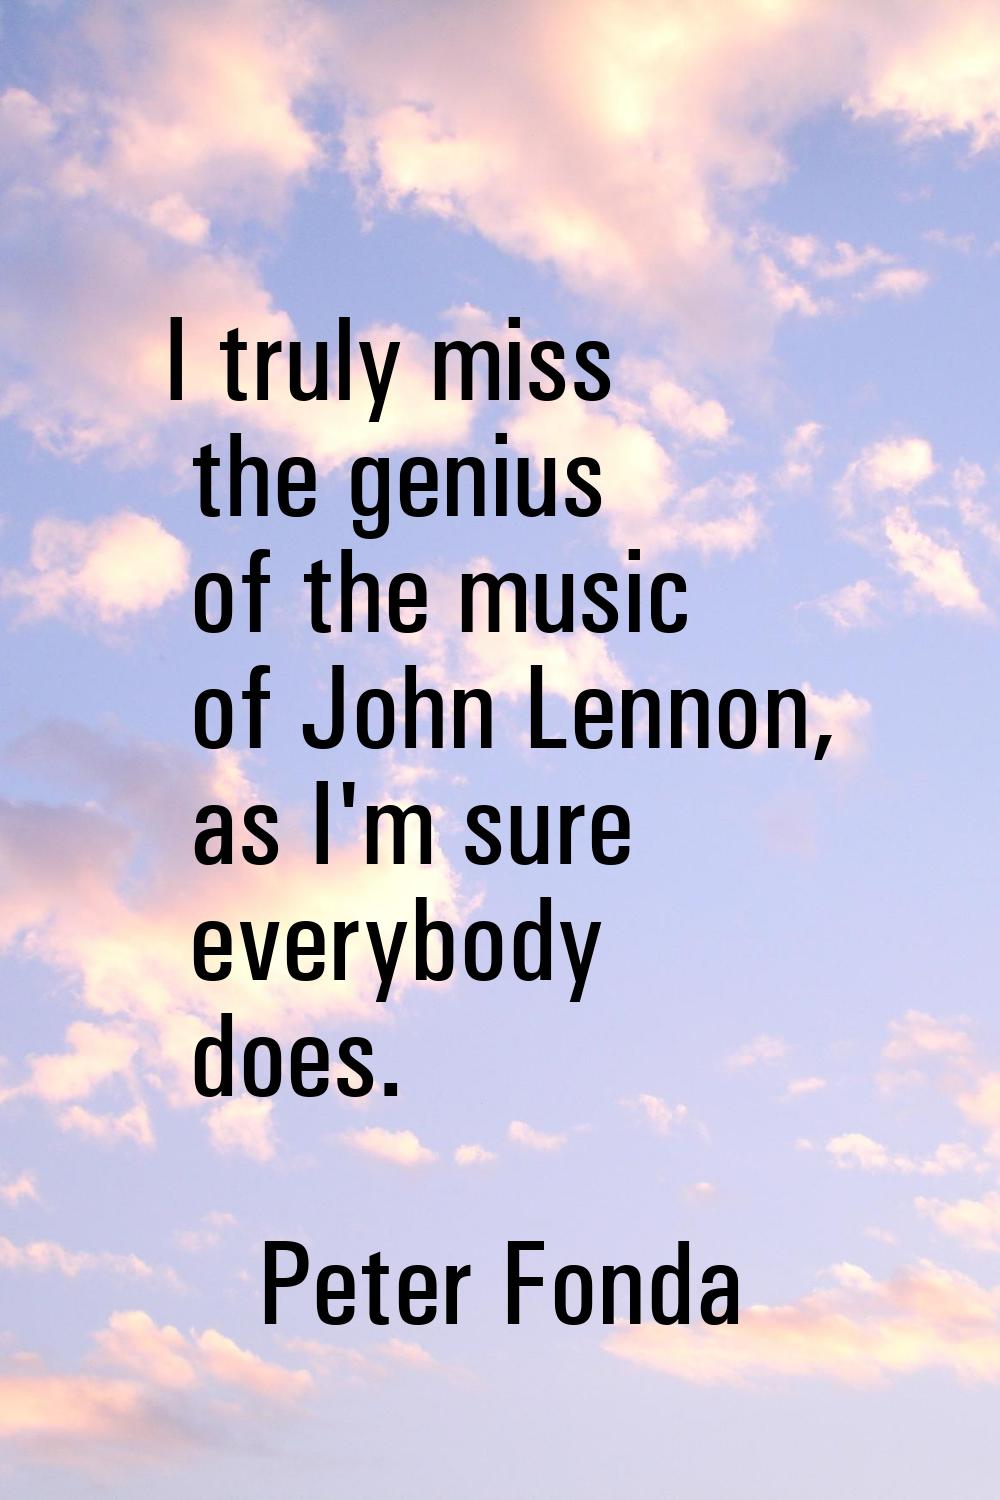 I truly miss the genius of the music of John Lennon, as I'm sure everybody does.